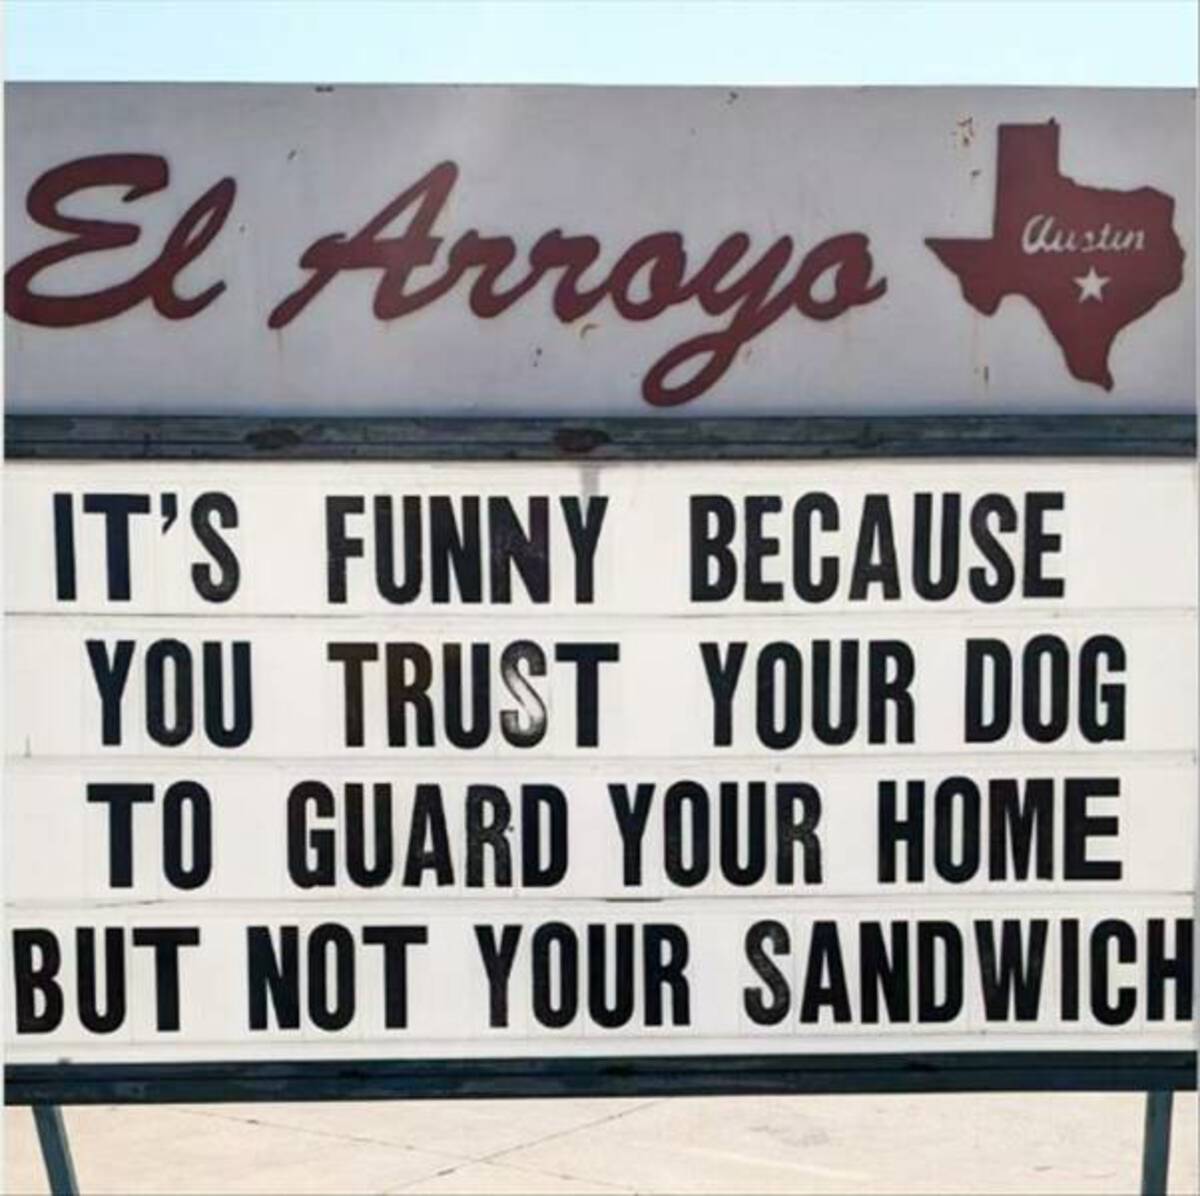 el arroyo - El Arroyo It'S Funny Because You Trust Your Dog To Guard Your Home But Not Your Sandwich Austin